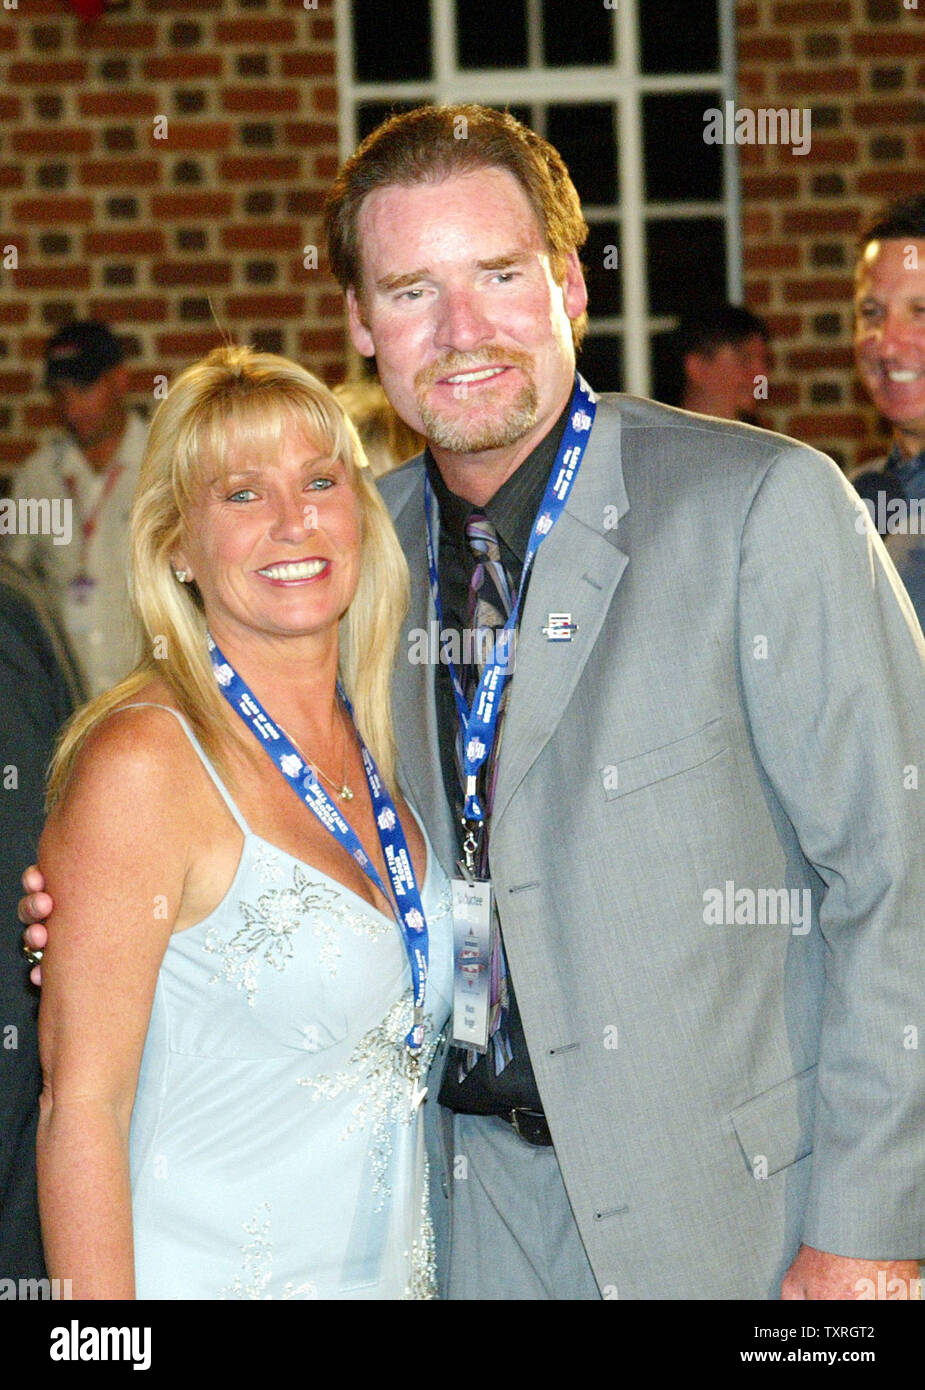 Baseball Hall of Fames newest inductee Wade Boggs poses for a photograph  with wife Debbie as they enter the National Baseball Hall of Fame and  Museum for an evening reception in Cooperstown